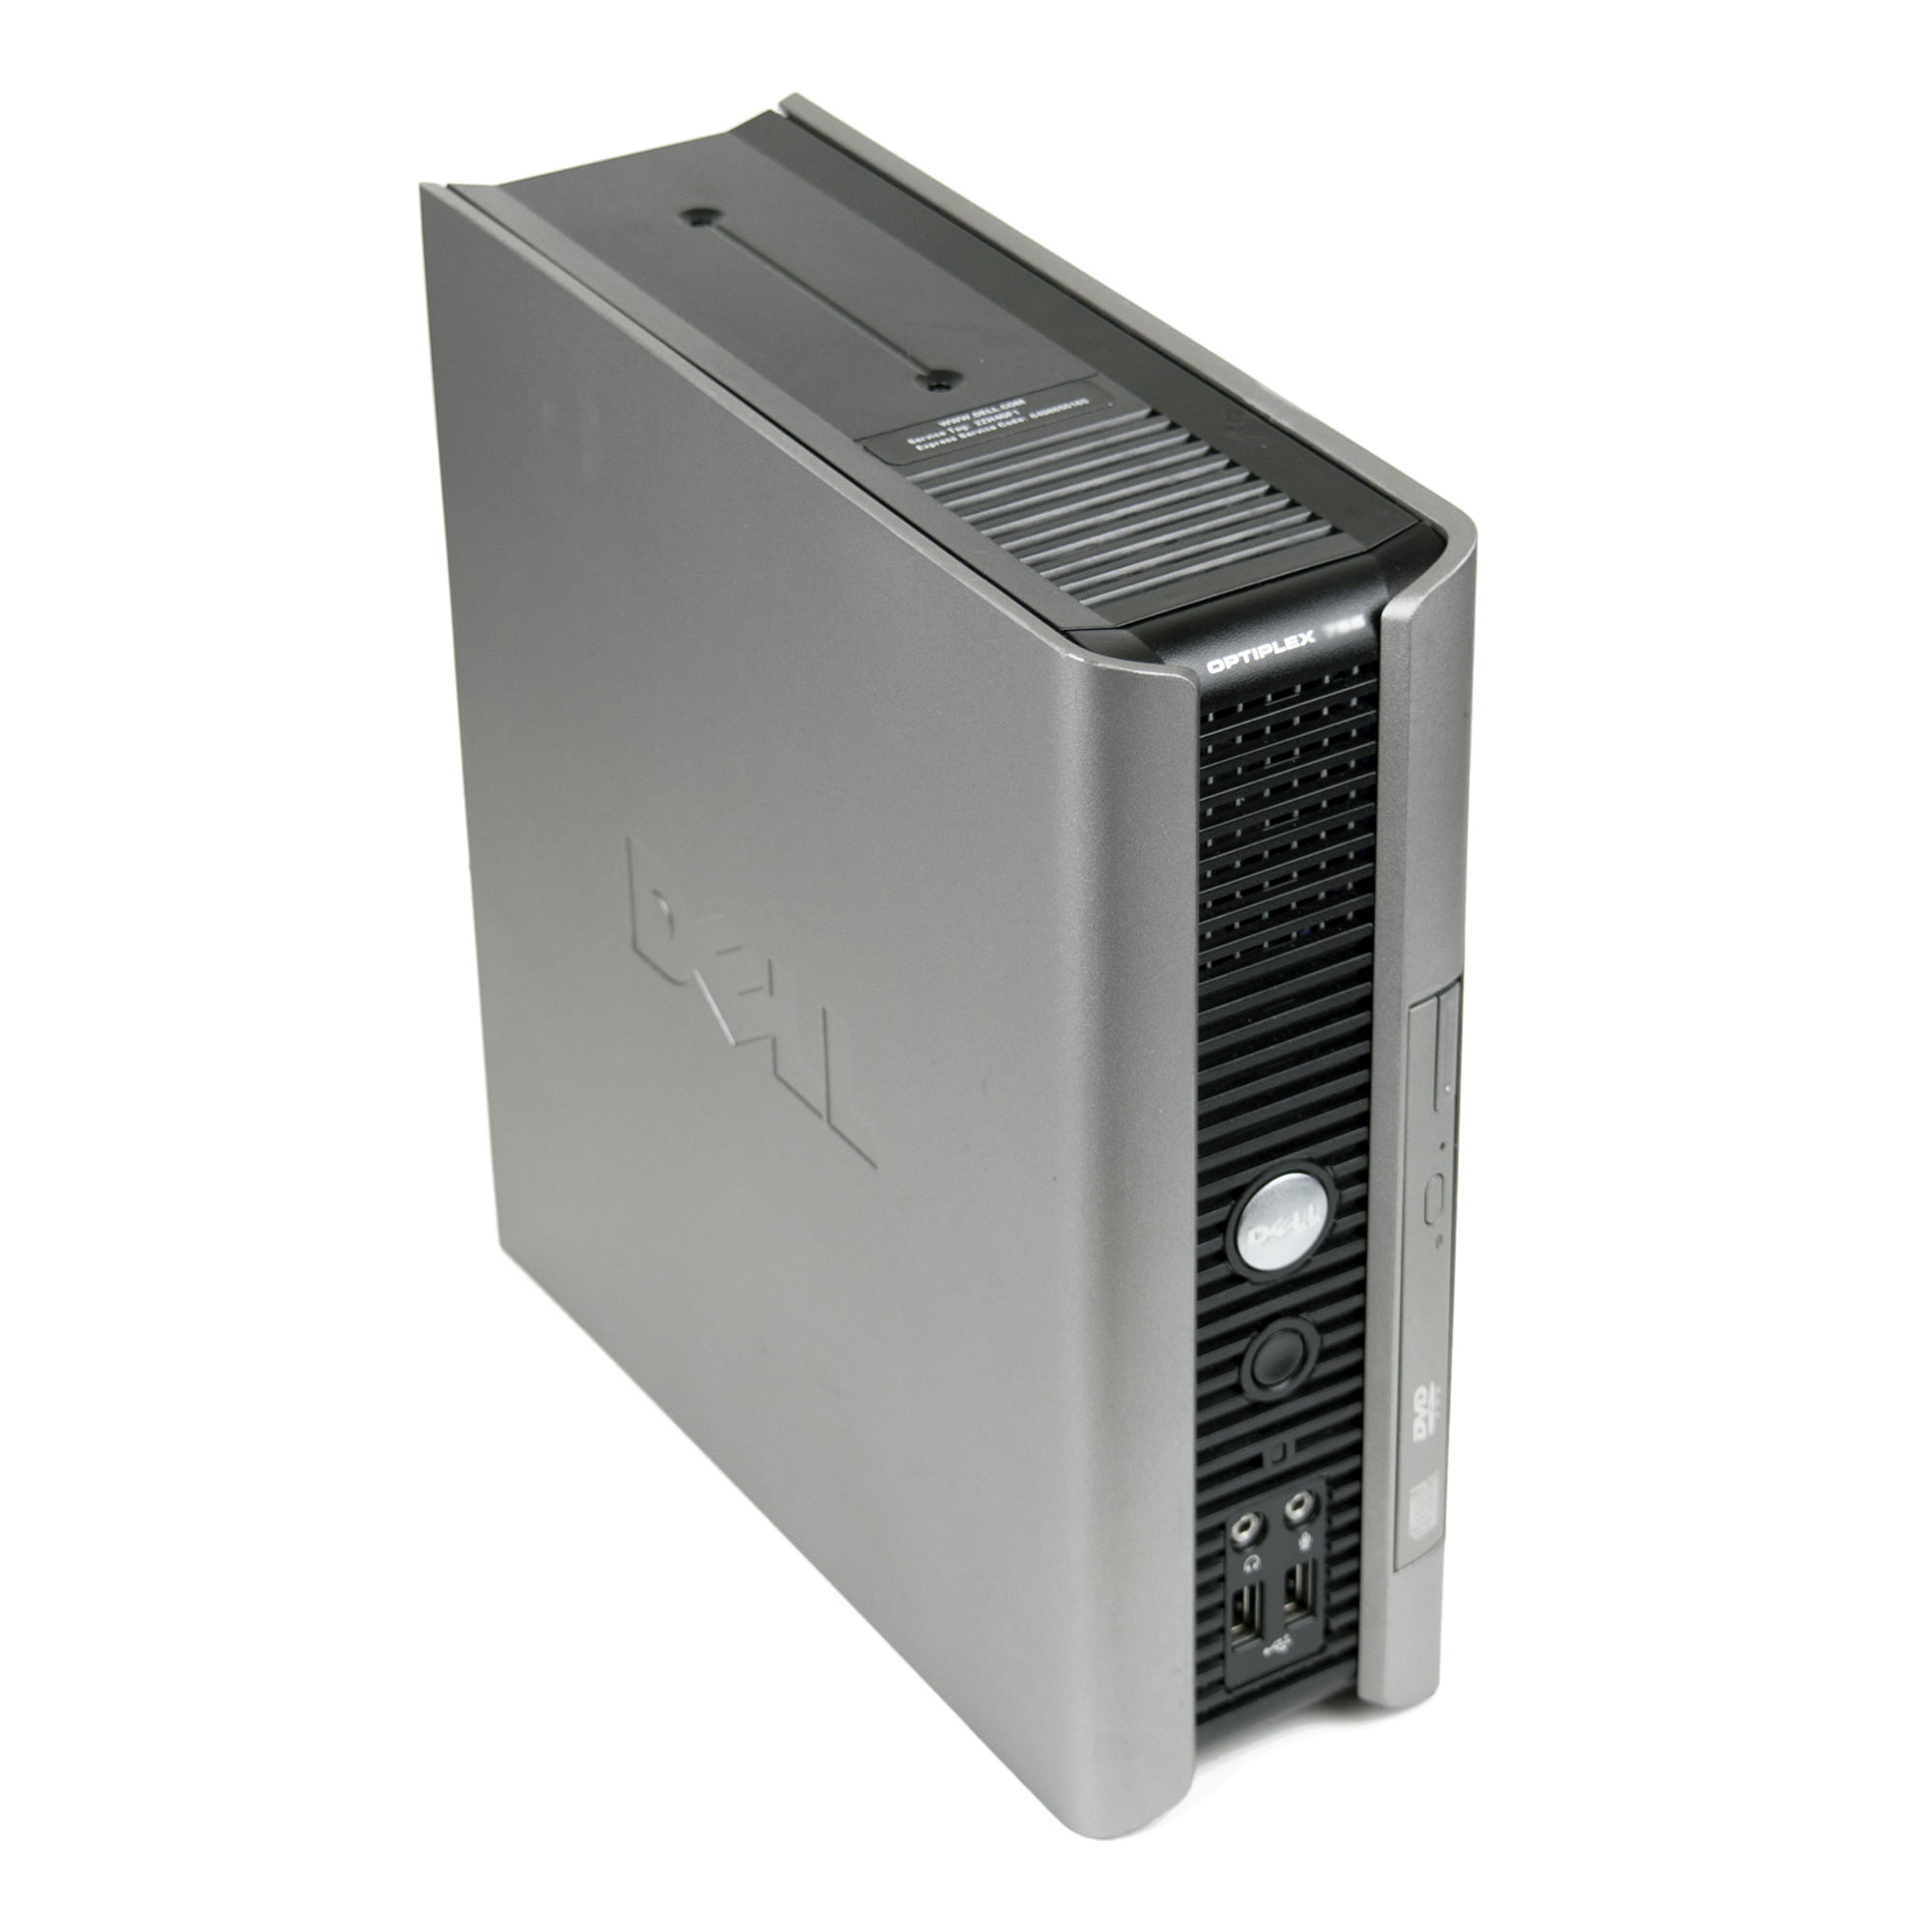 Refurbished Dell Optiplex 745 Ultra Small Form Factor Dual Core 3.4Ghz